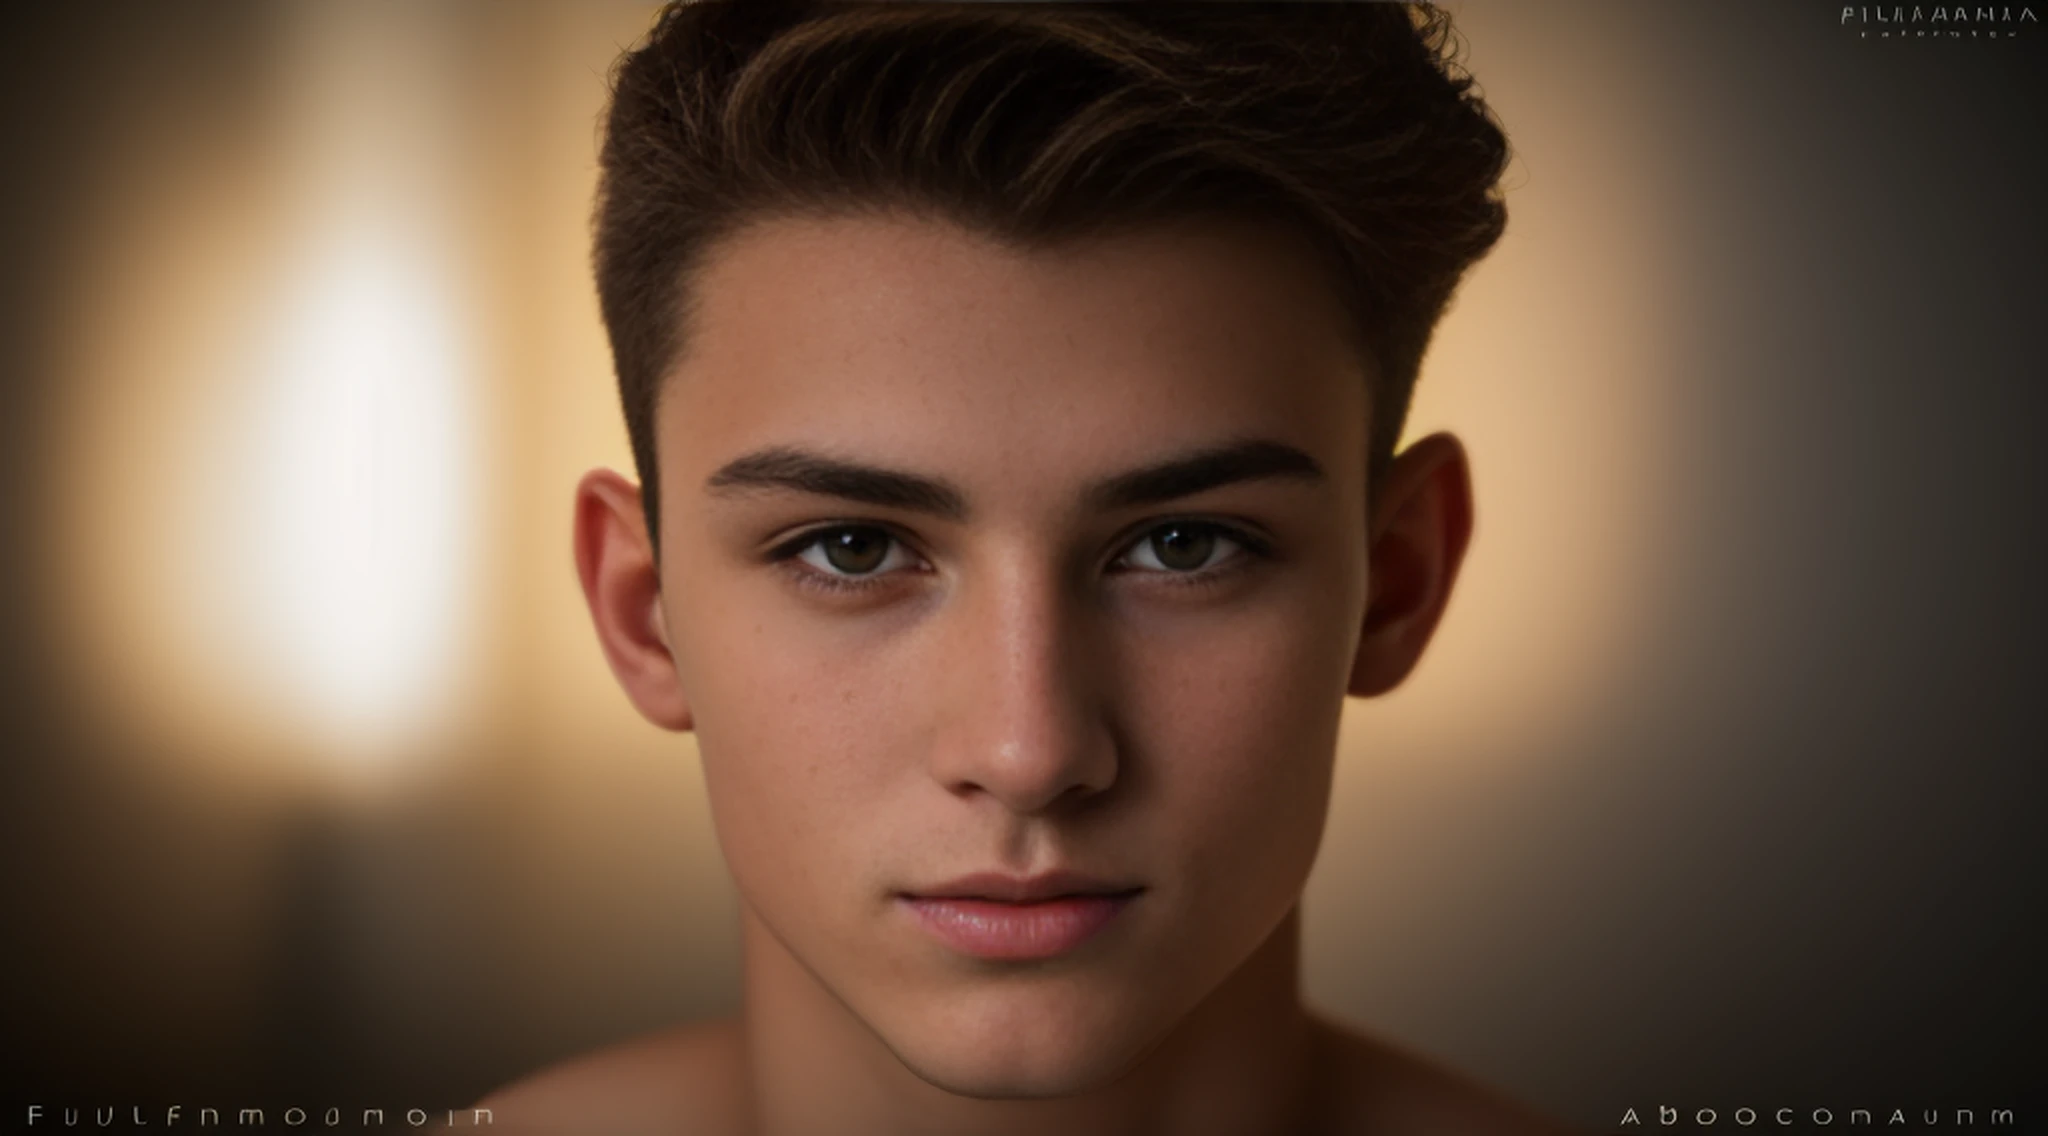 croatian young man 18 years old, role model, extremely pretty, top quality picture, Fujifilm XT3, illuminated environment, the best photography, elegant poses, fully body